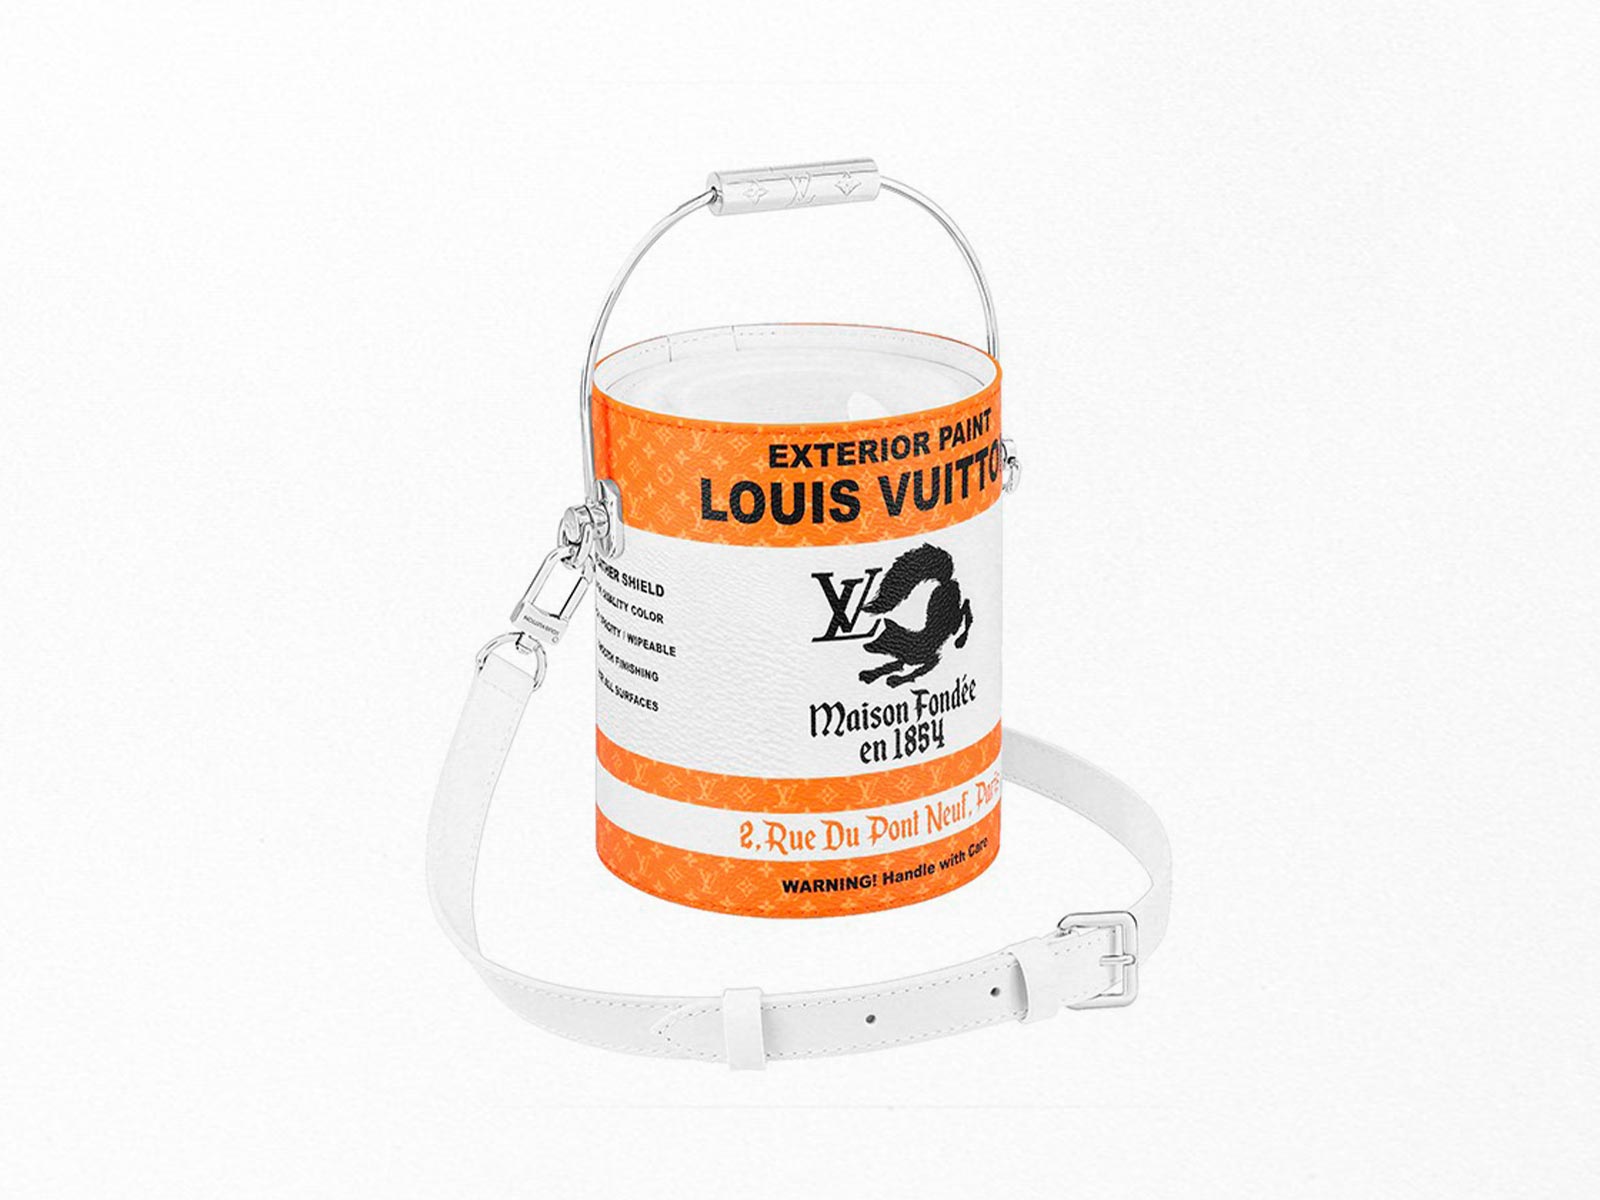 Yes, we love the Louis Vuitton Paint Can Bag